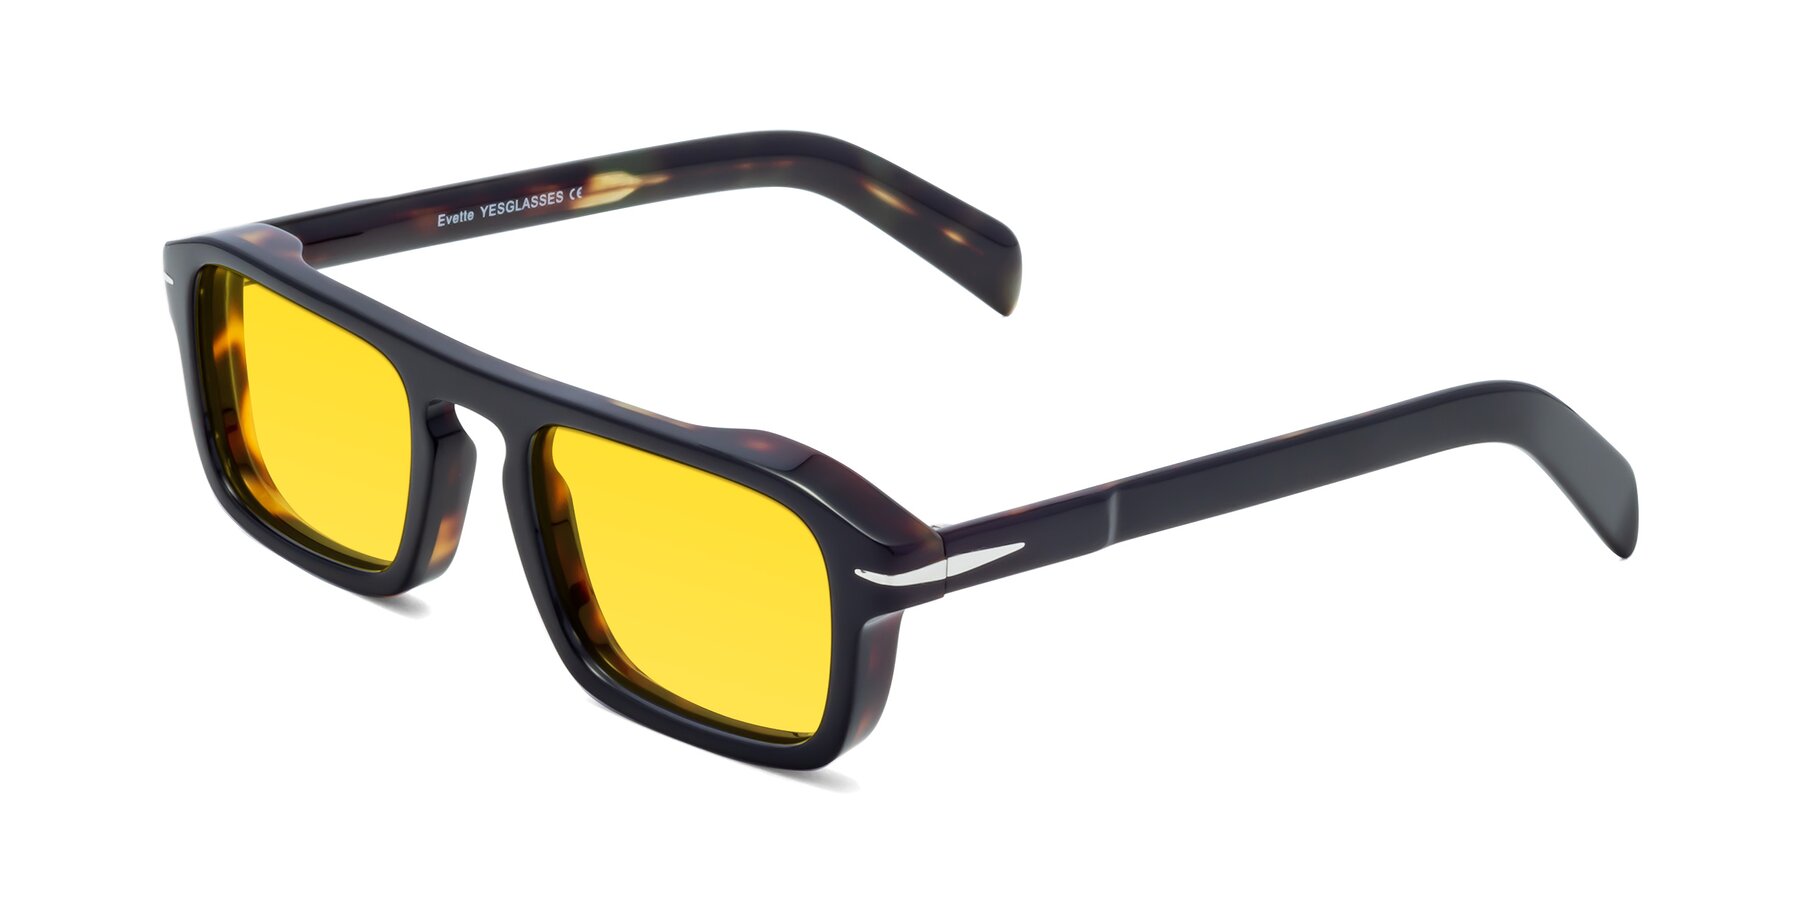 Angle of Evette in Black-Tortoise with Yellow Tinted Lenses